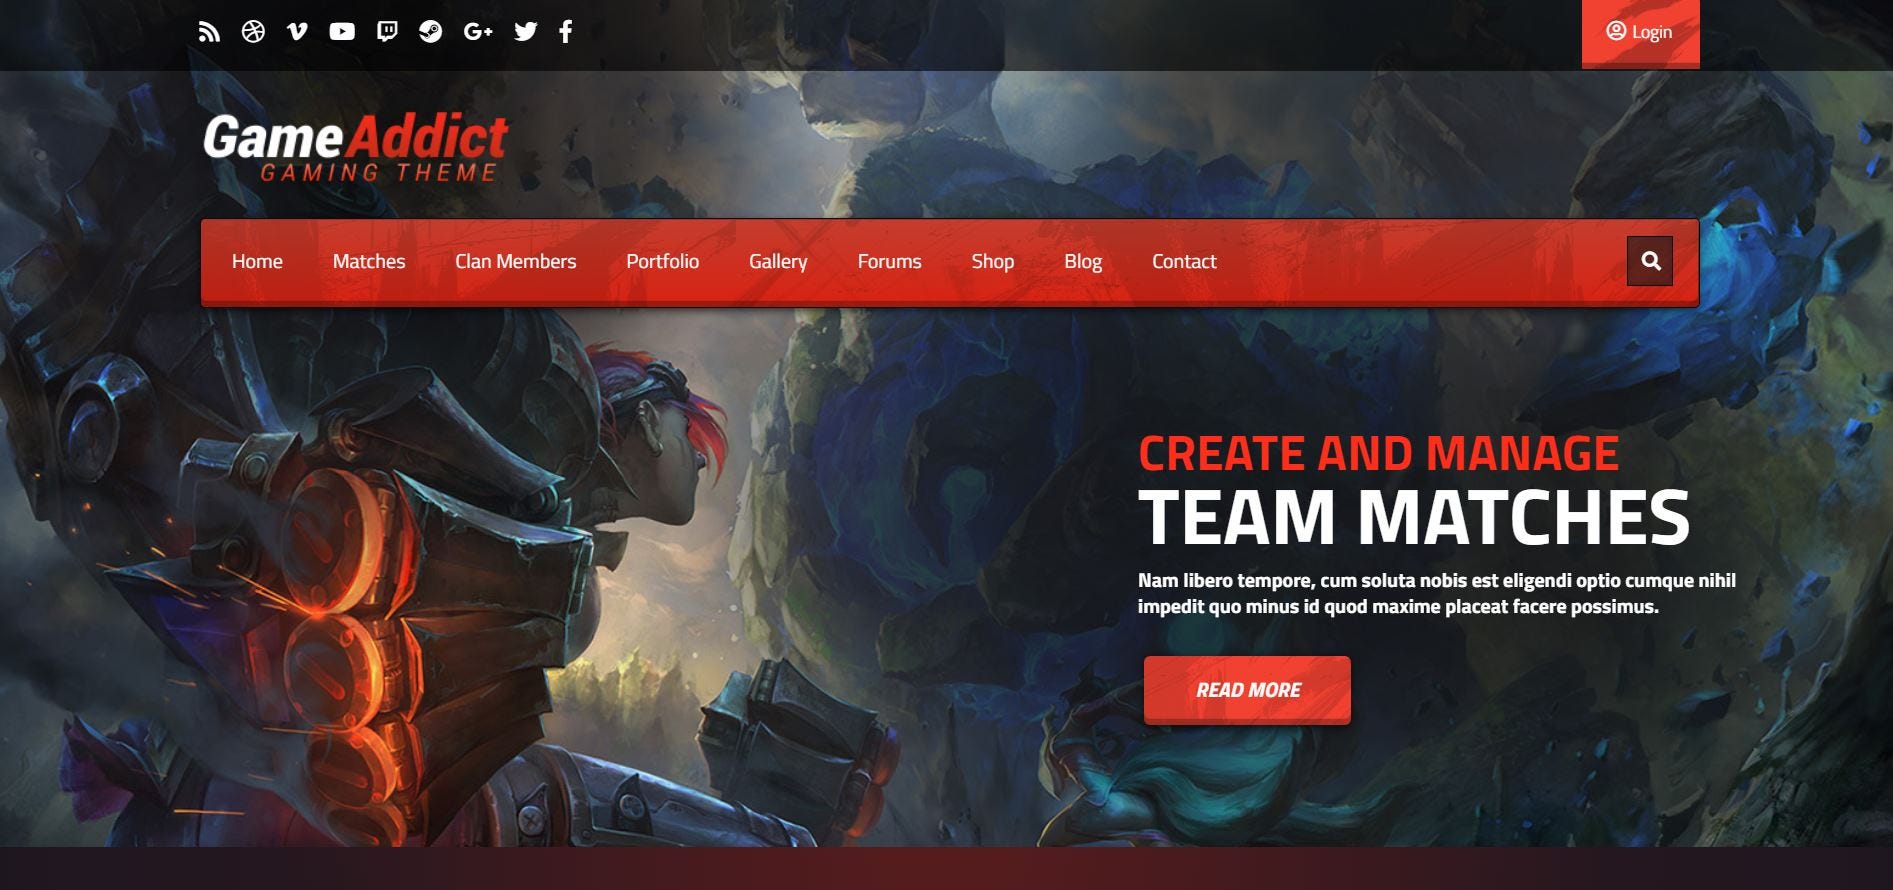 Good Games - eSports & Magazine Gaming Template by _nK